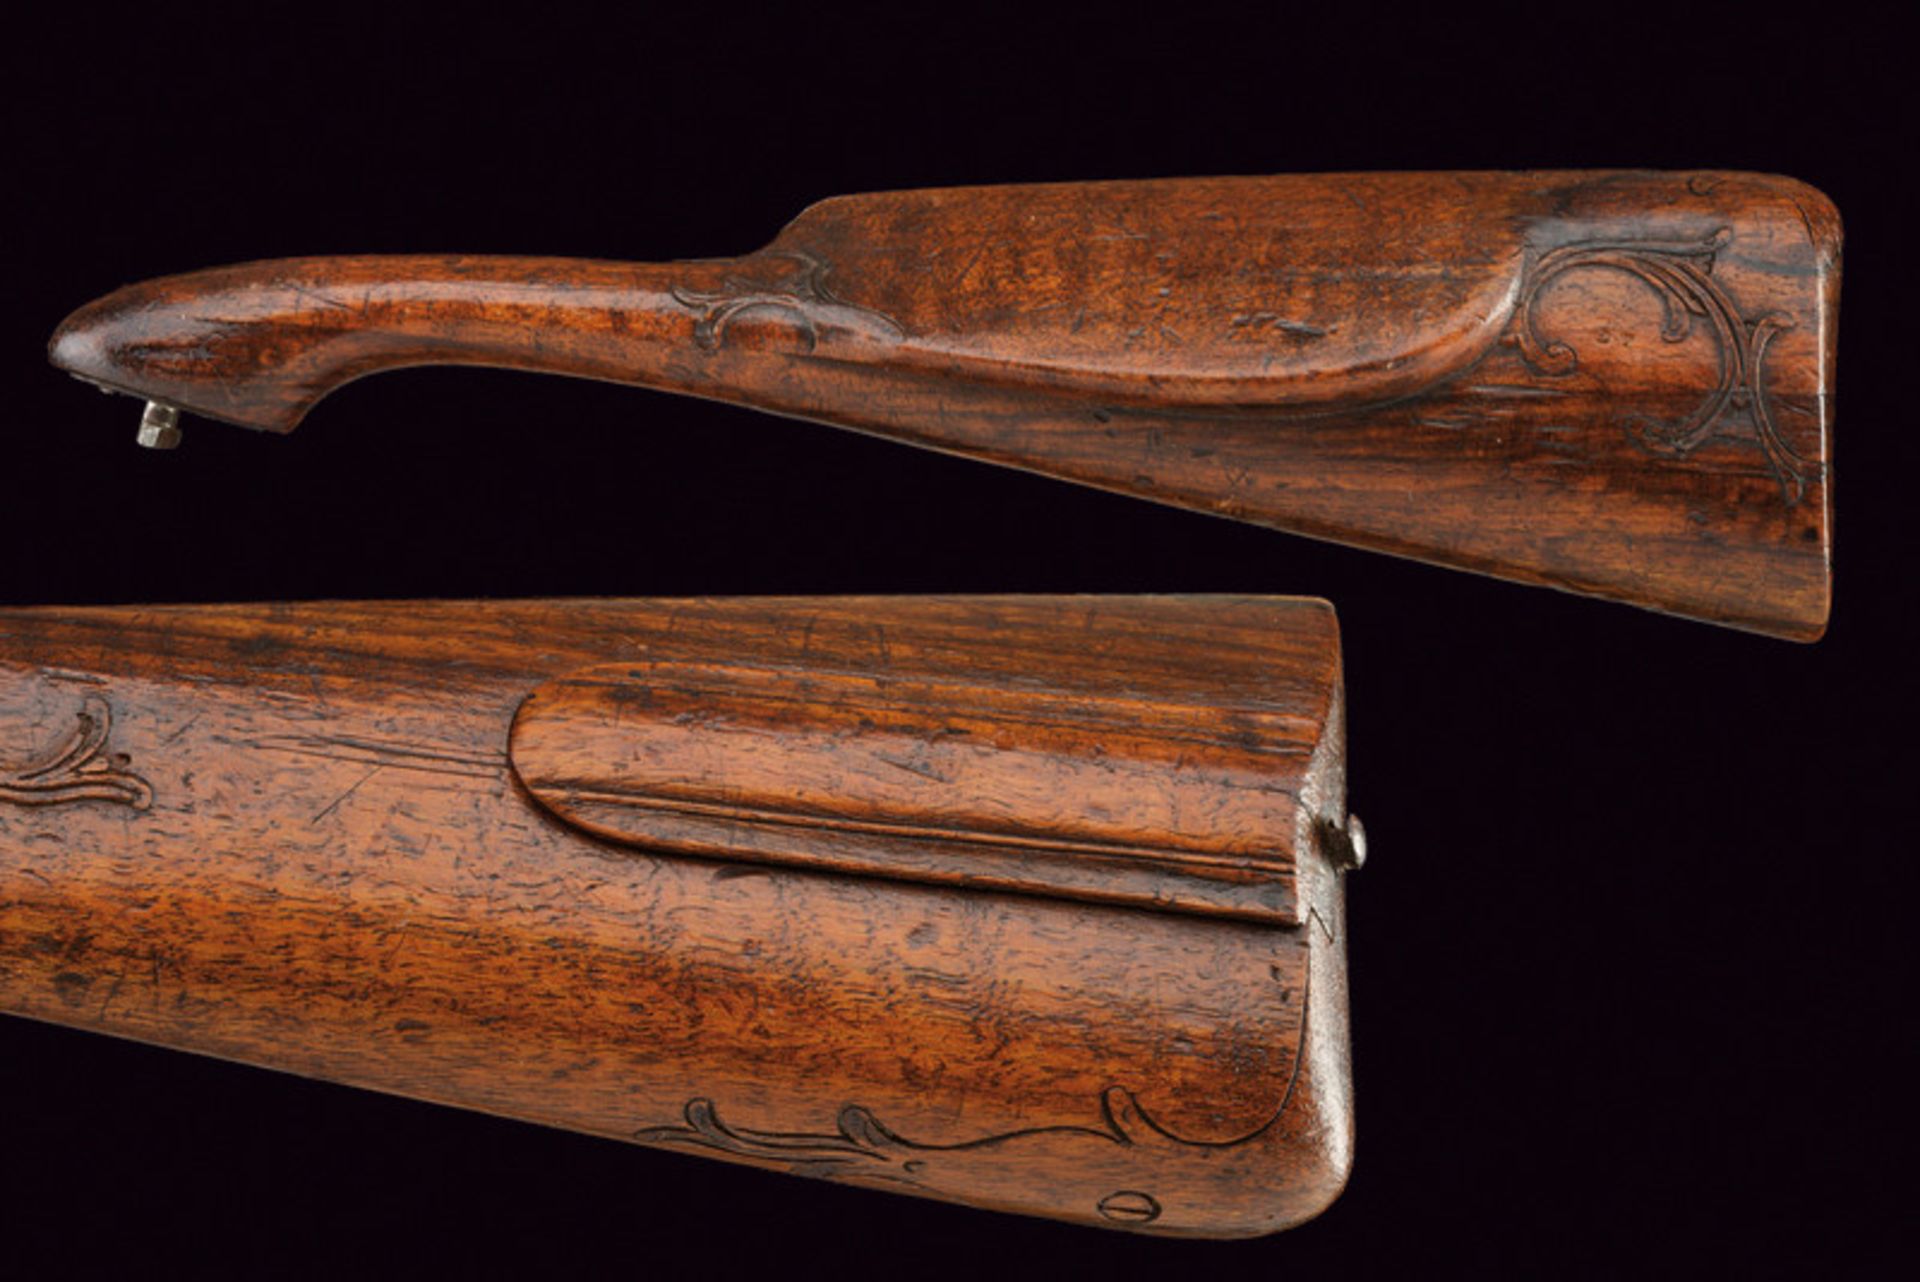 A detachable buttstock dating: 19th Century provenance: Germany Made of wood, slightly sculpted with